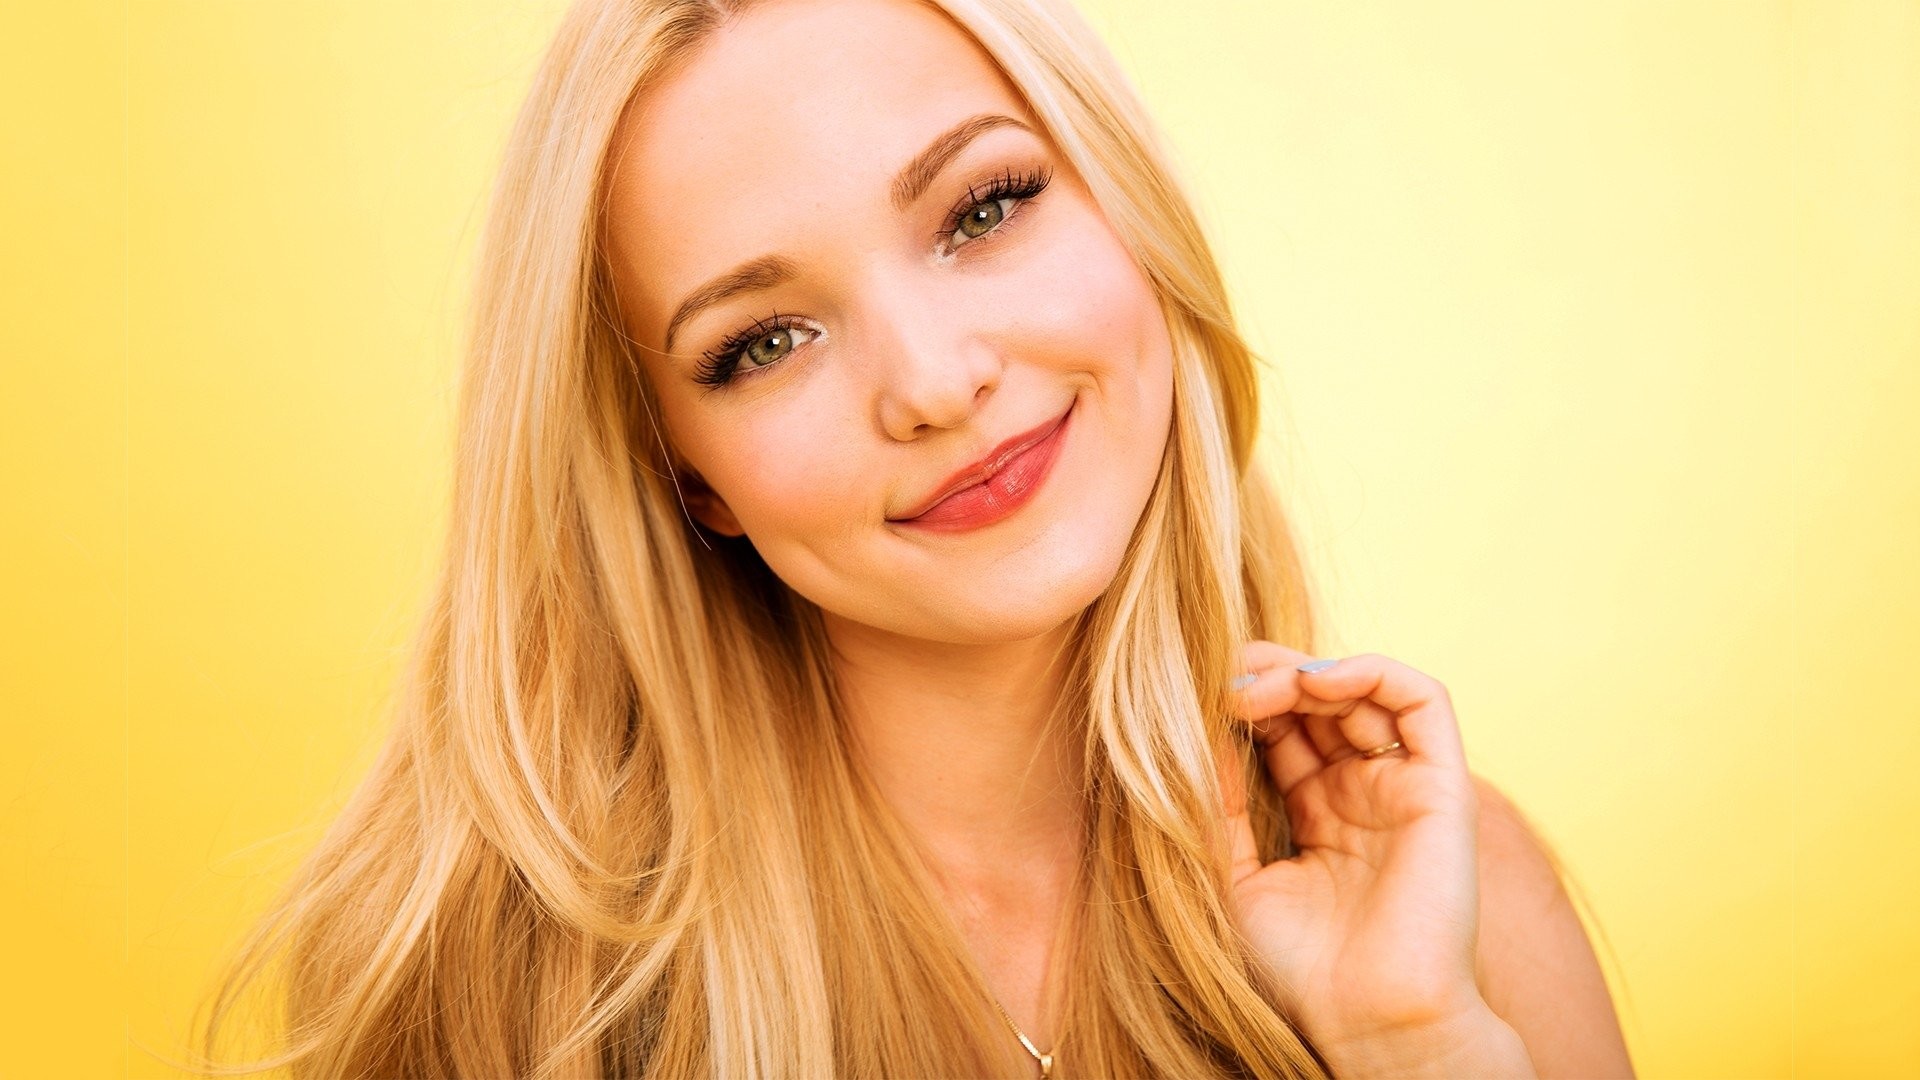 Dove Cameron Wallpapers 73 images 1920x1080